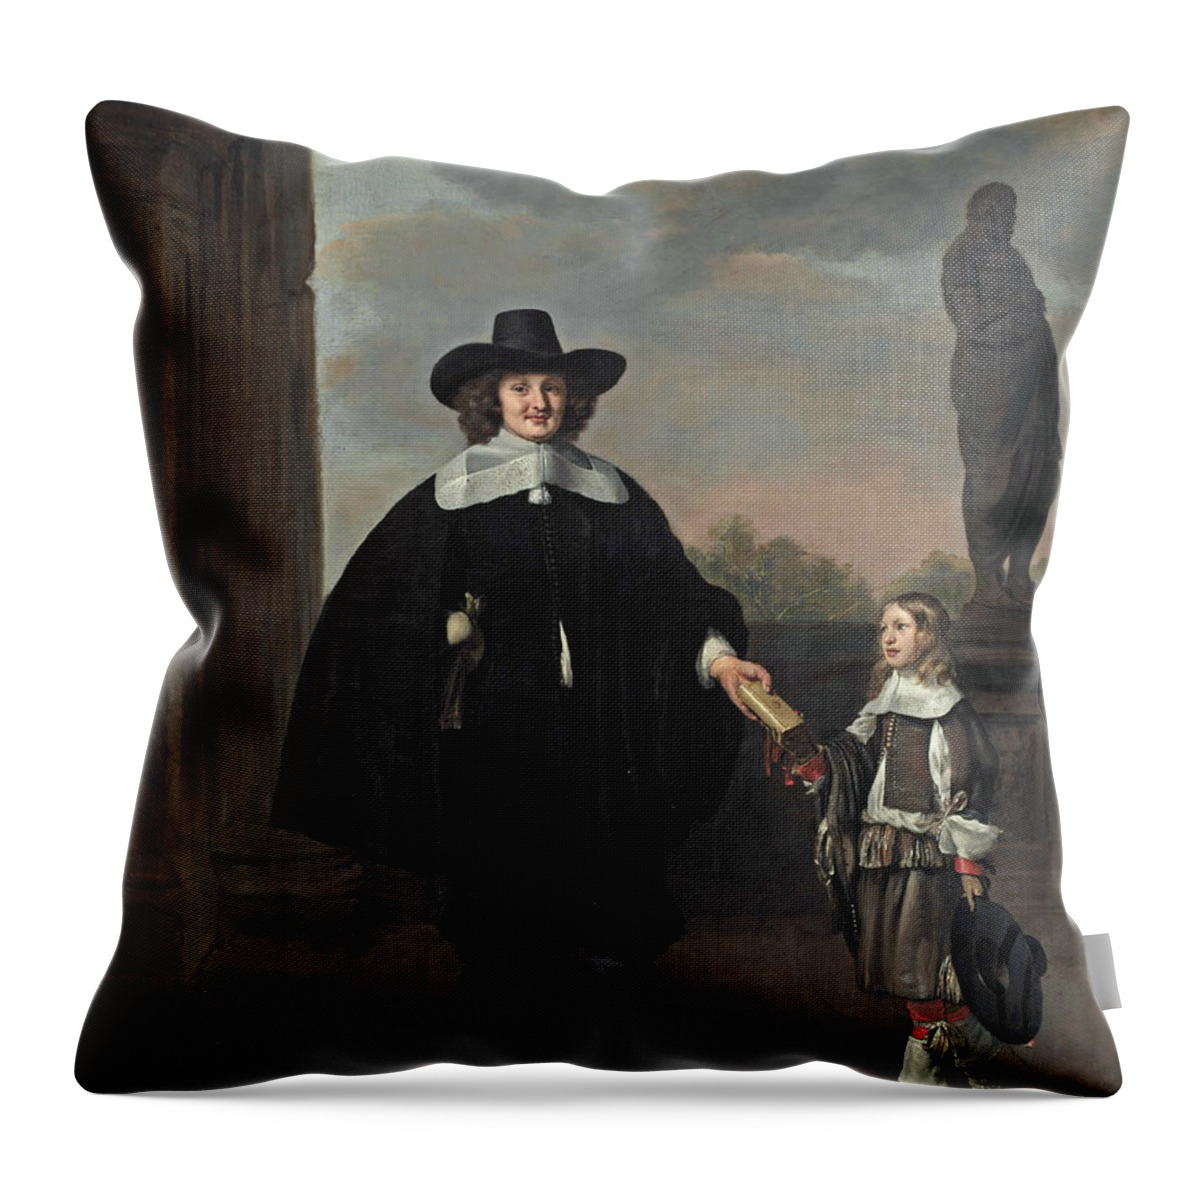 17th Century Art Throw Pillow featuring the painting Frederick van Velthuysen by Thomas de Keyser